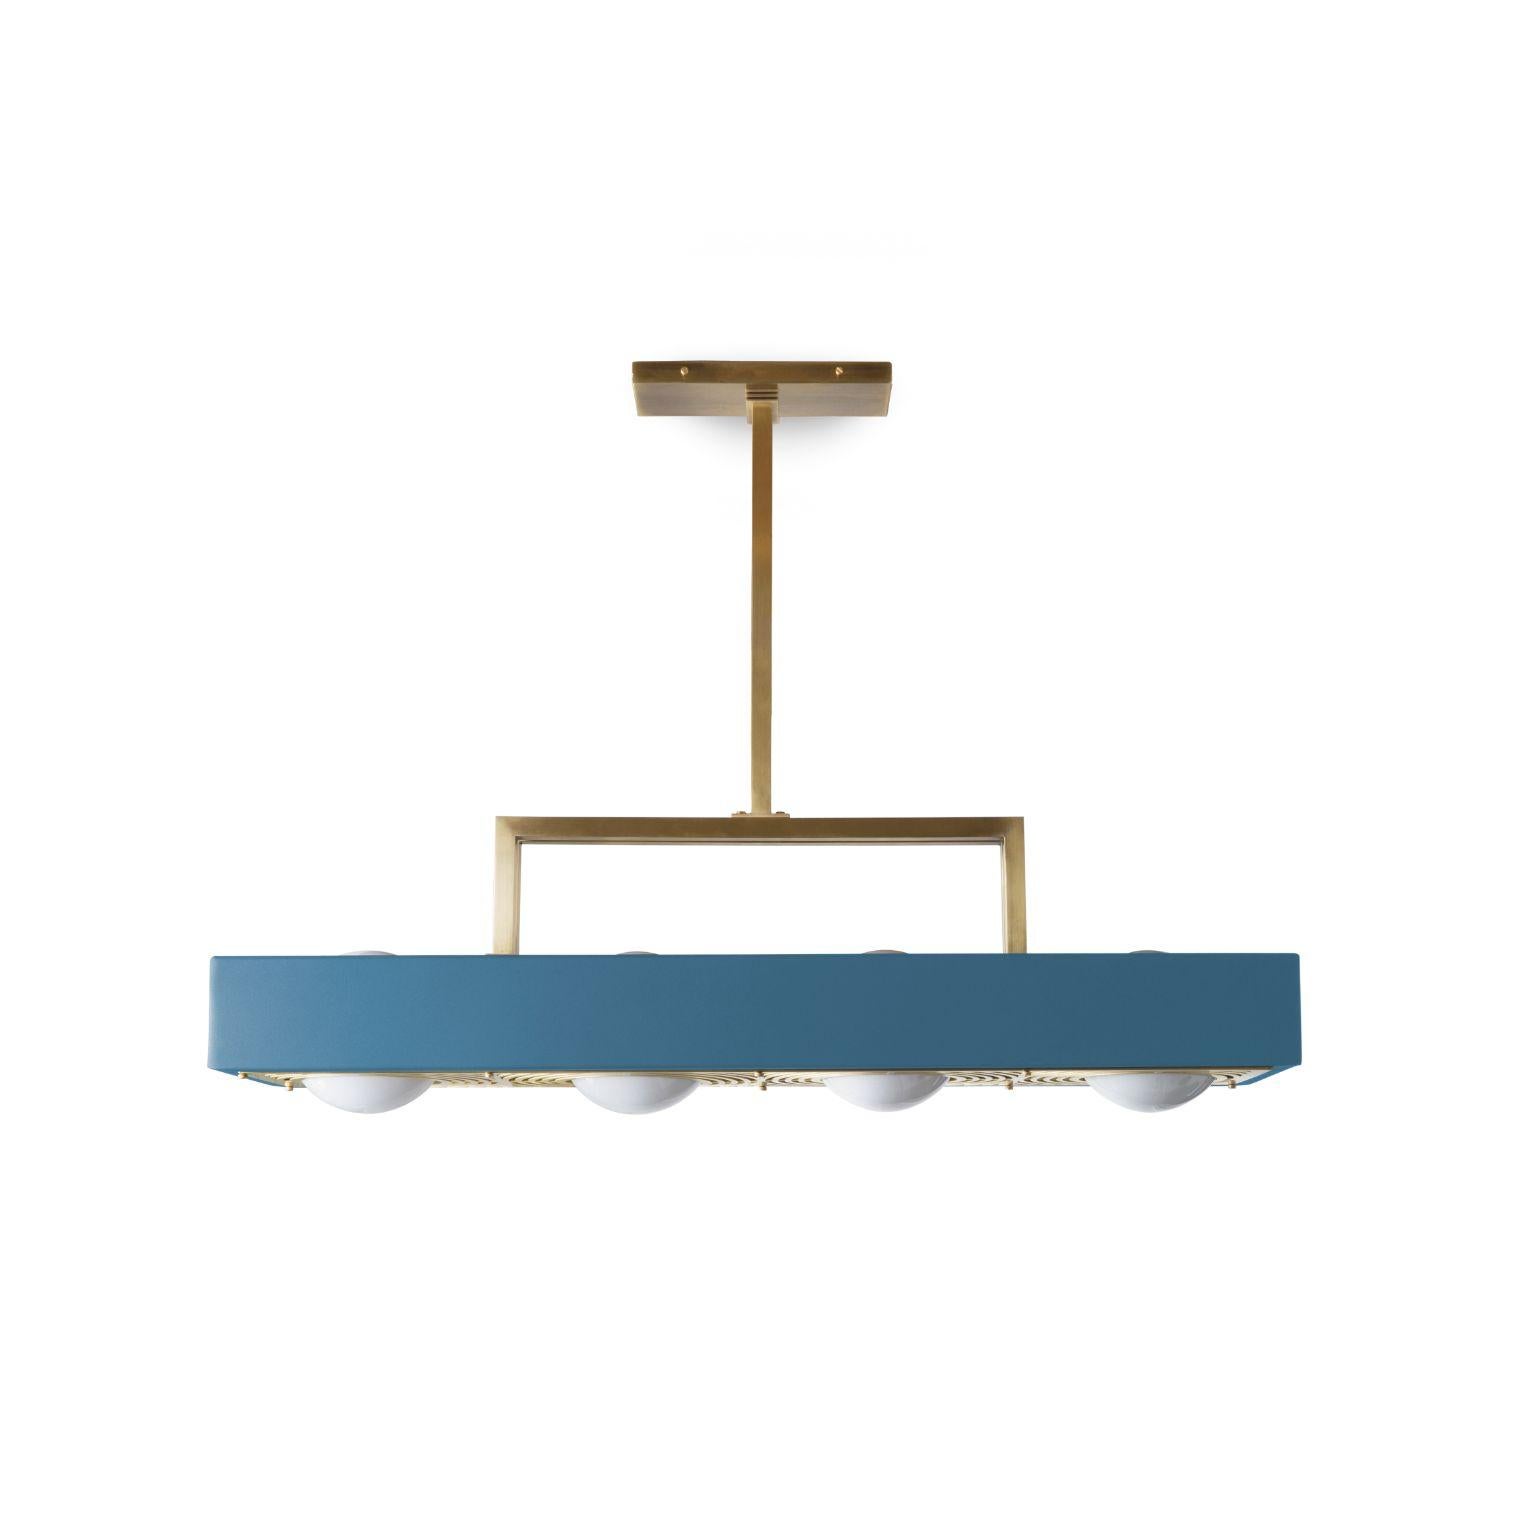 Kernel pendant light, blue by Bert Frank
Dimensions: 18.5 (only lamp) x 80 x 20 cm
Materials: Brass, steel

Also available: in white and black.

When Adam Yeats and Robbie Llewellyn founded Bert Frank in 2013 it was a meeting of minds and the